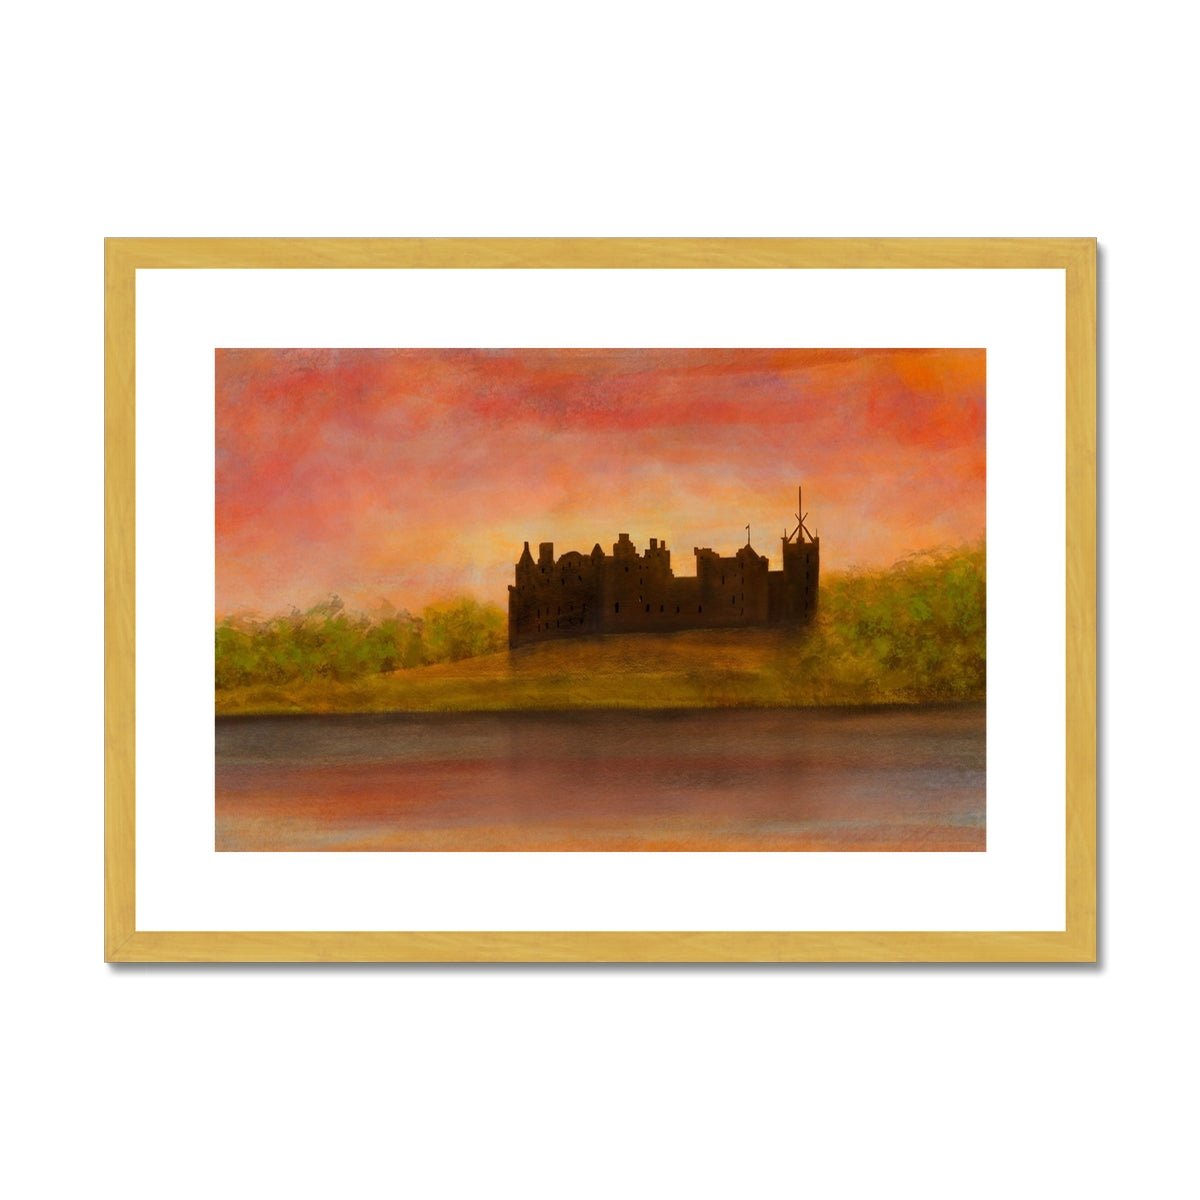 Linlithgow Palace Dusk Painting | Antique Framed & Mounted Prints From Scotland-Antique Framed & Mounted Prints-Historic & Iconic Scotland Art Gallery-A2 Landscape-Gold Frame-Paintings, Prints, Homeware, Art Gifts From Scotland By Scottish Artist Kevin Hunter